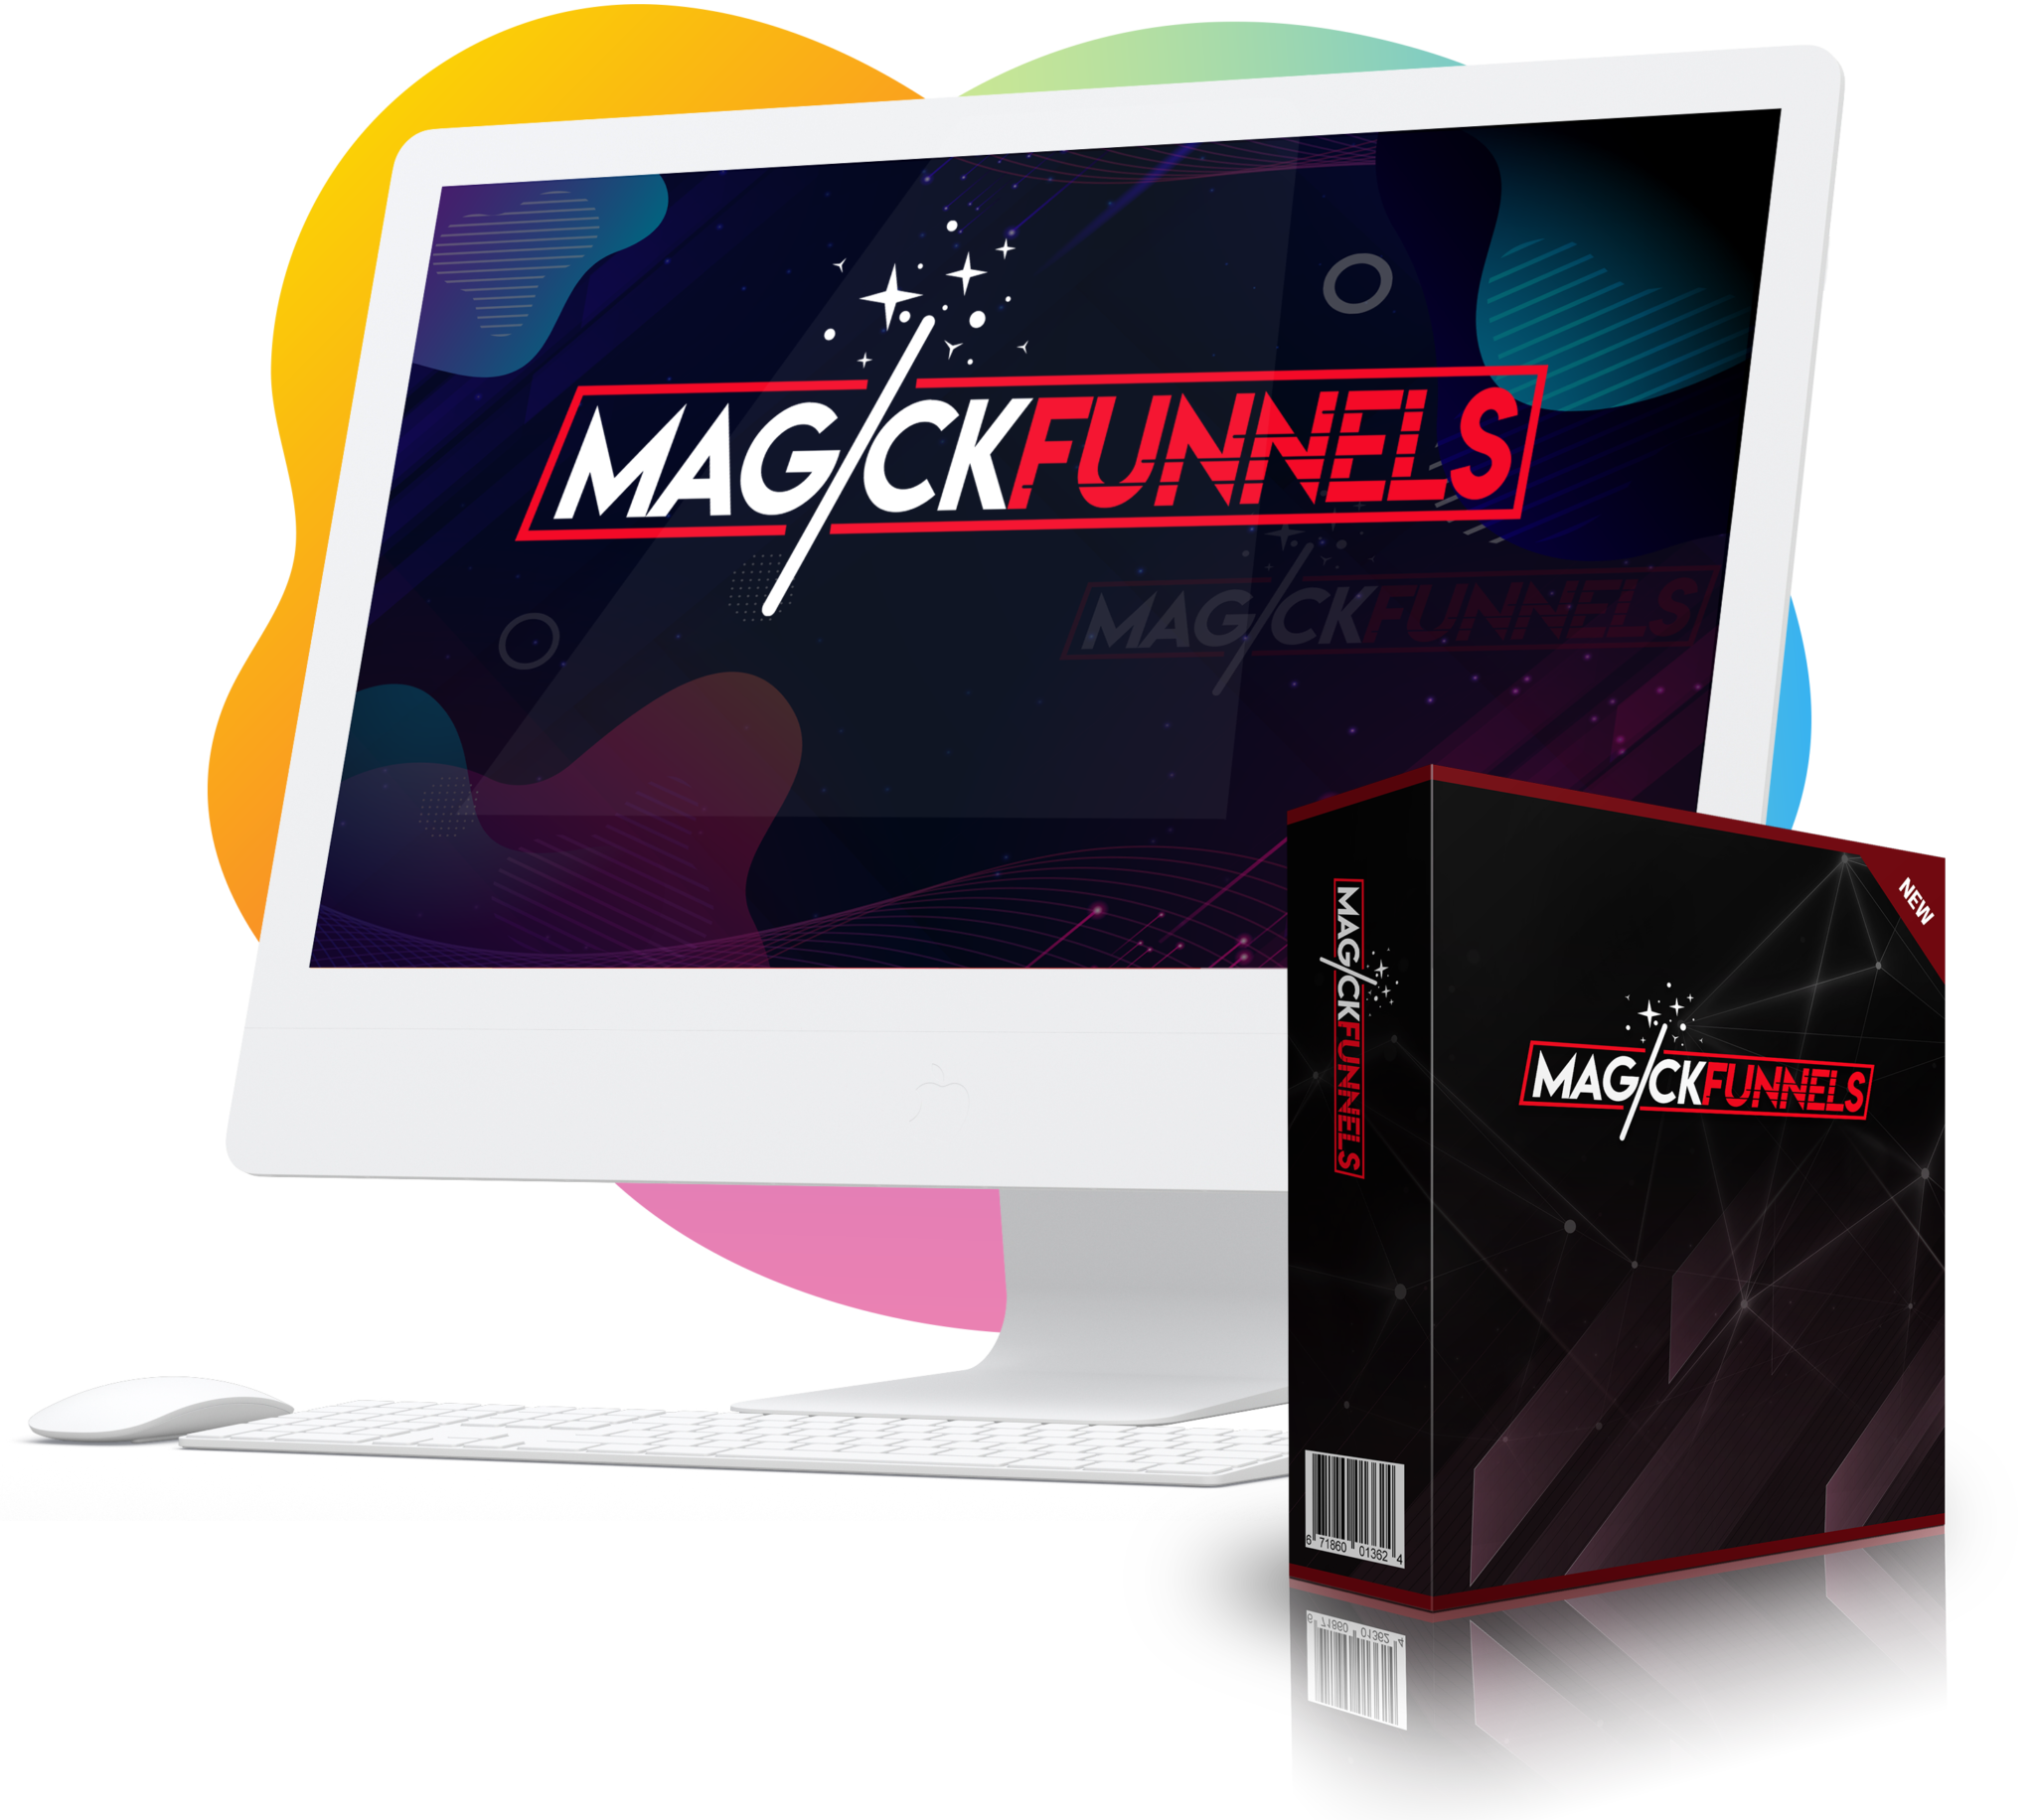 magick funnels review